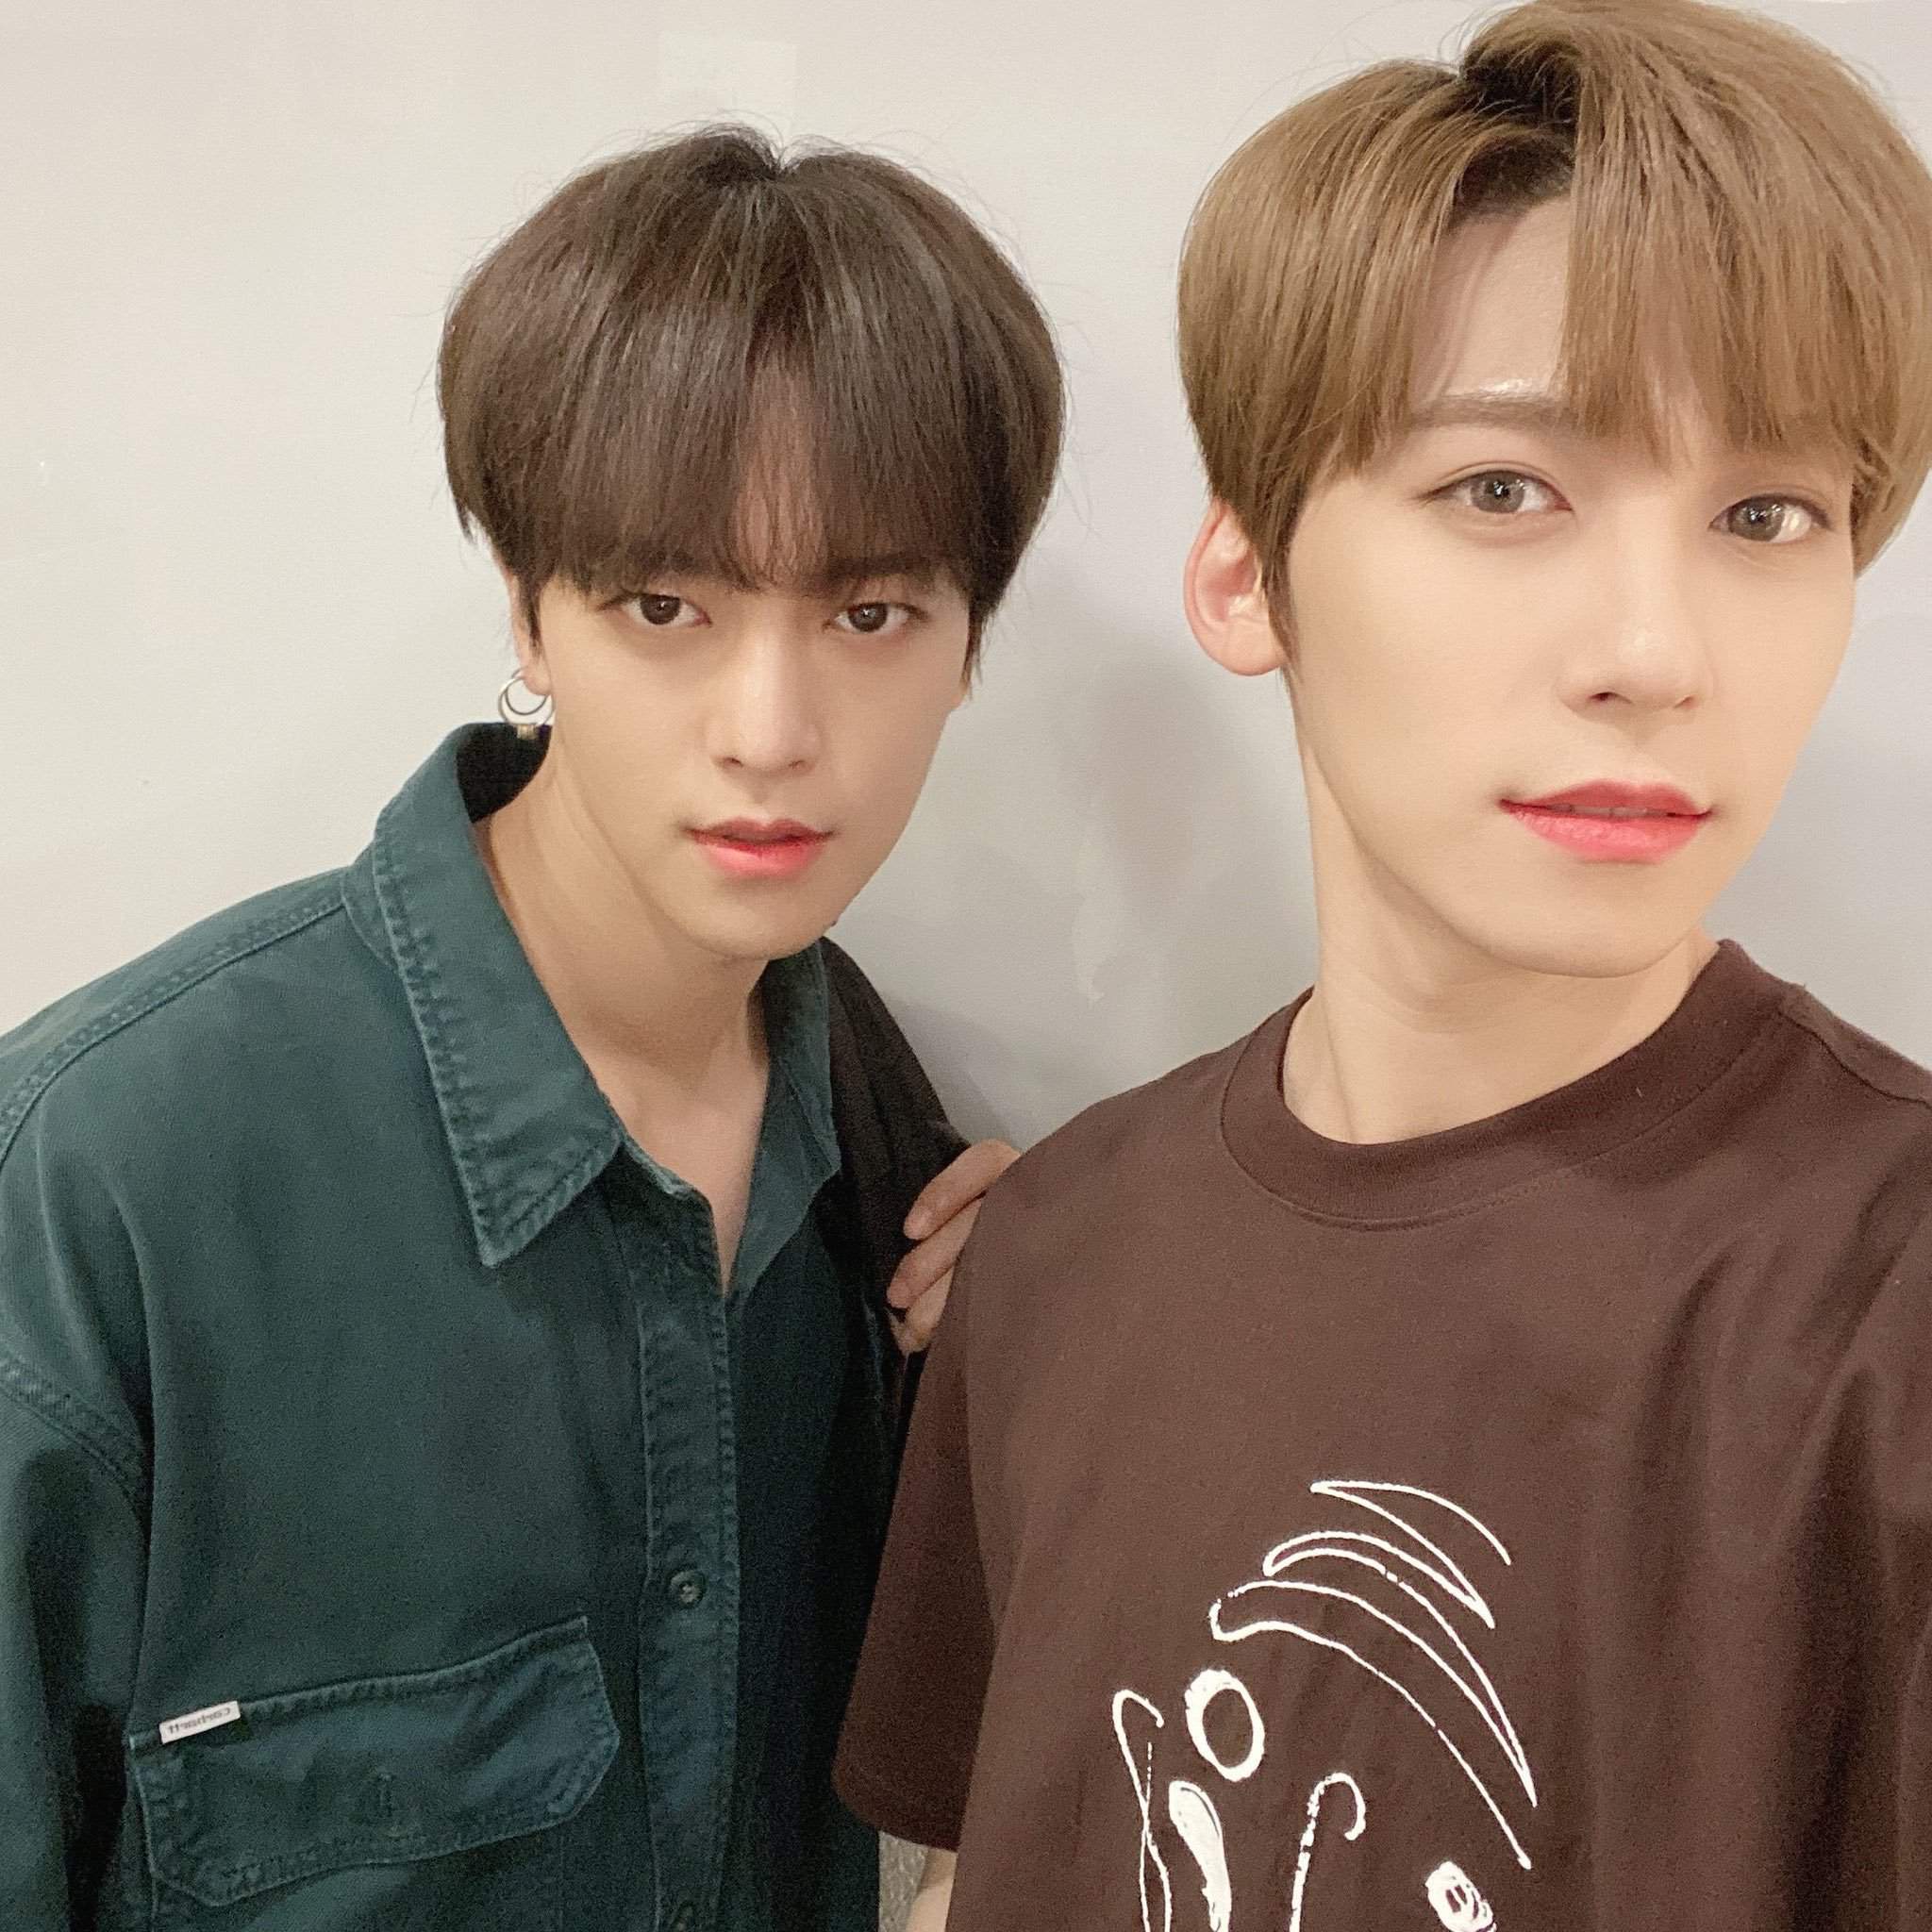 SNS 200810 ➱ Update official Twitter of ONEUS: "✮ ONEUS Family ✮"...